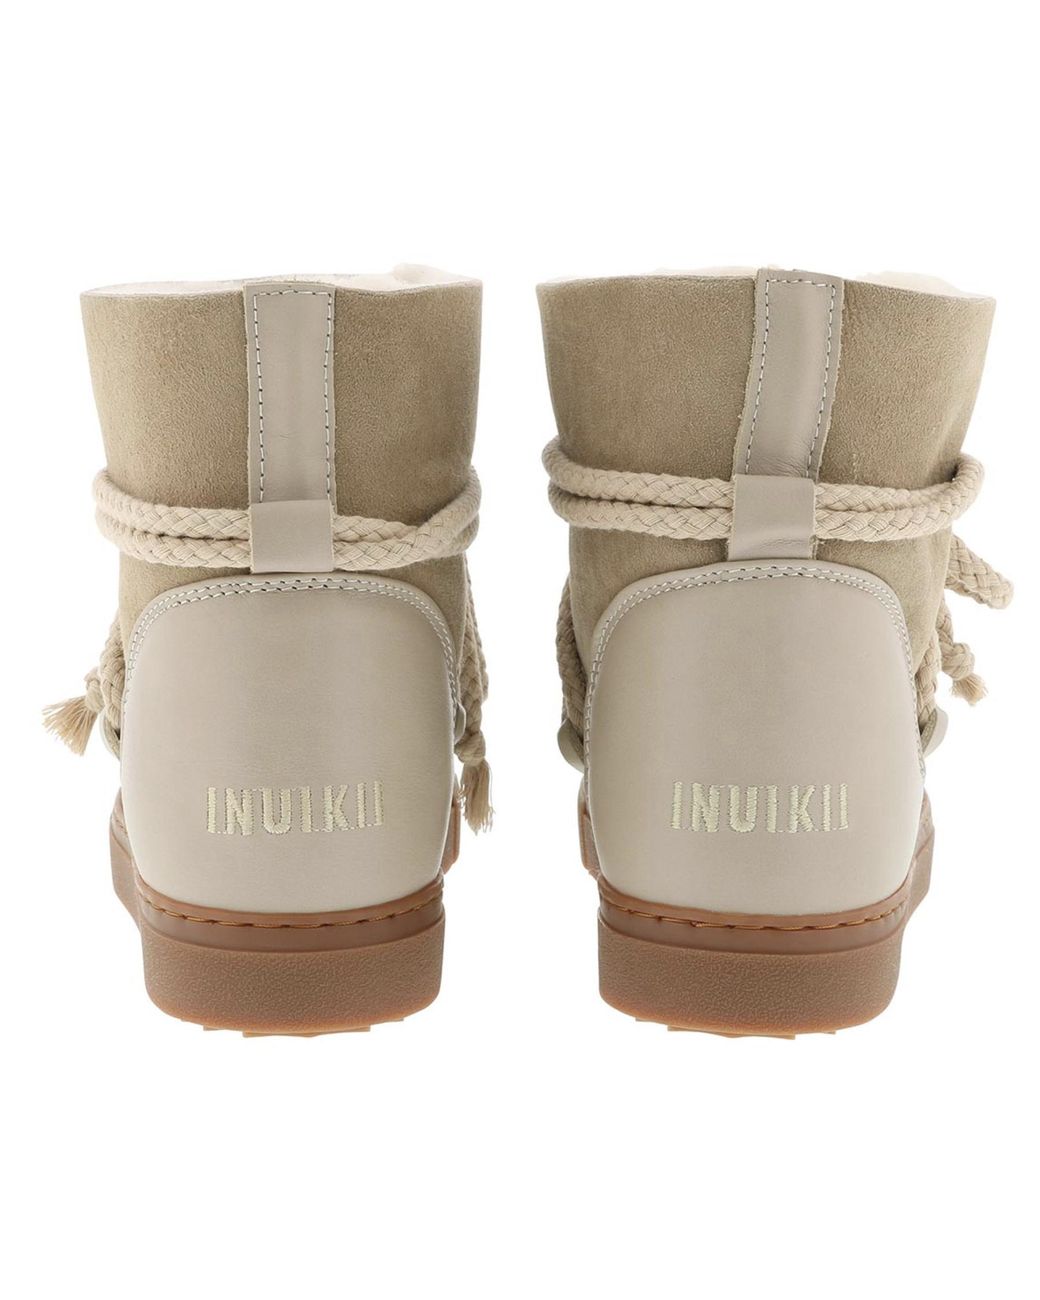 Brown Inuikii Book Boot Beige Suede Leather With Sweet Sneakers Wedgers With Internal Rest in Grey Womens Boots Inuikii Boots 